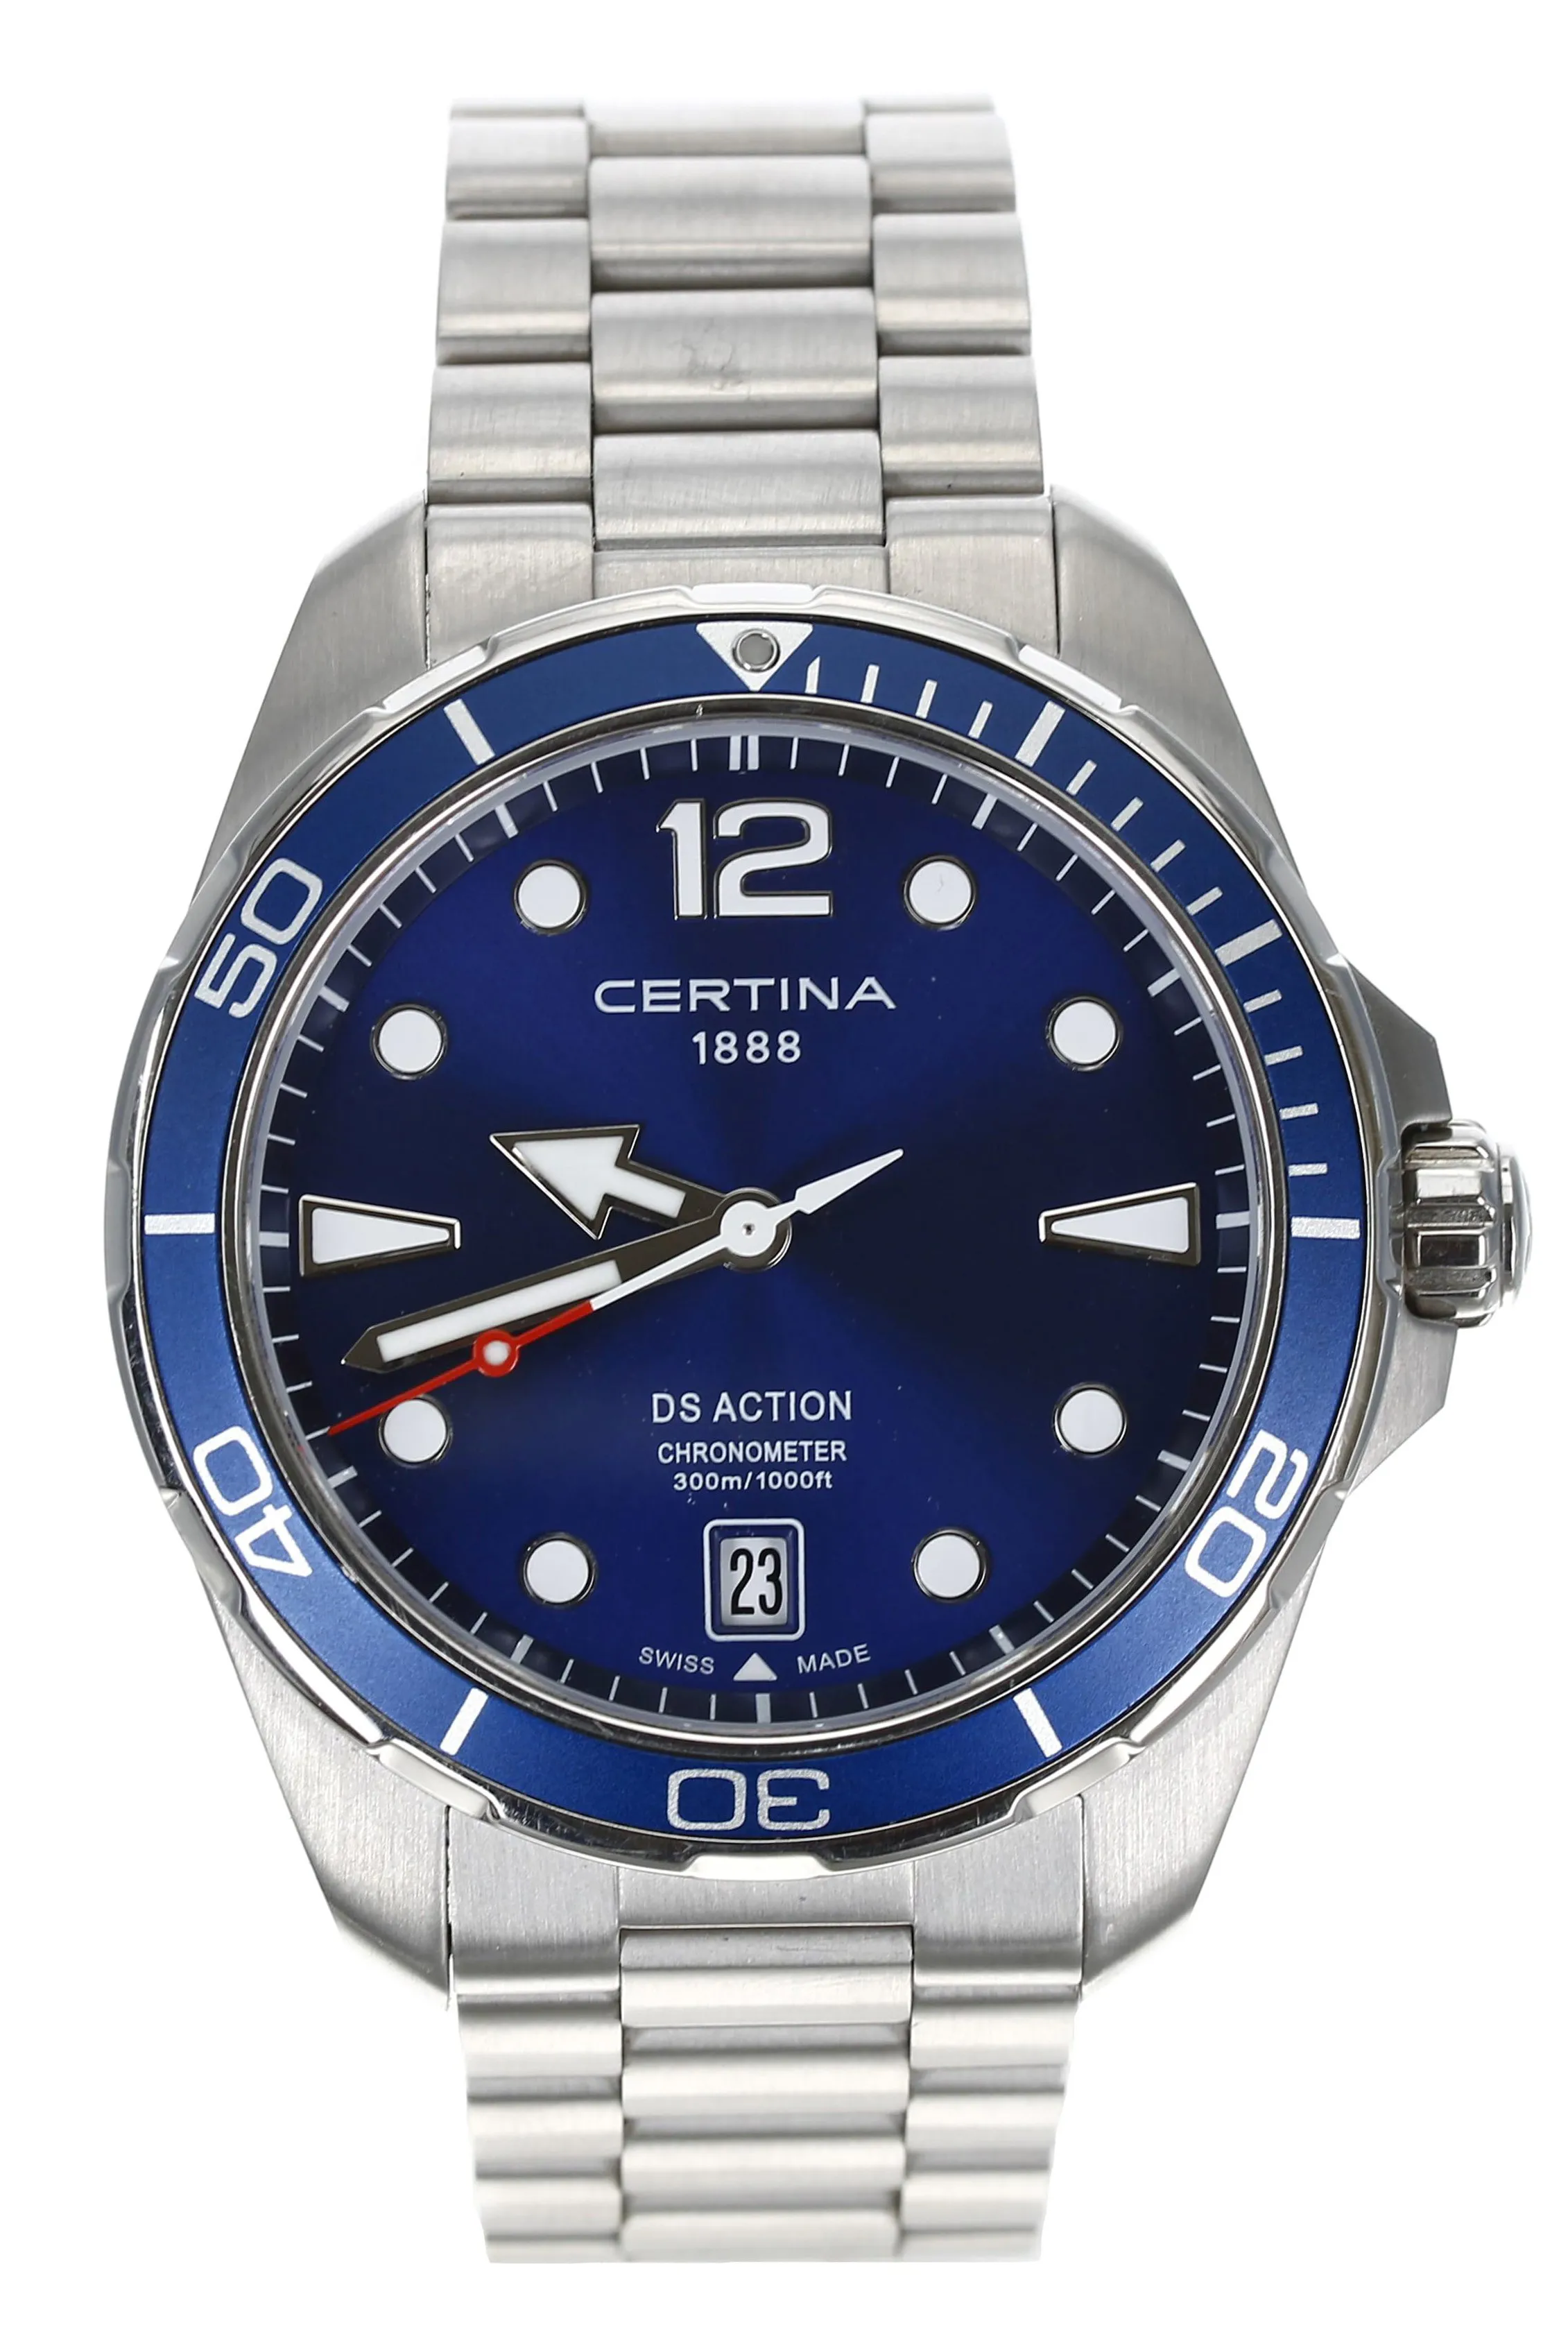 Certina DS Action C032451A nullmm